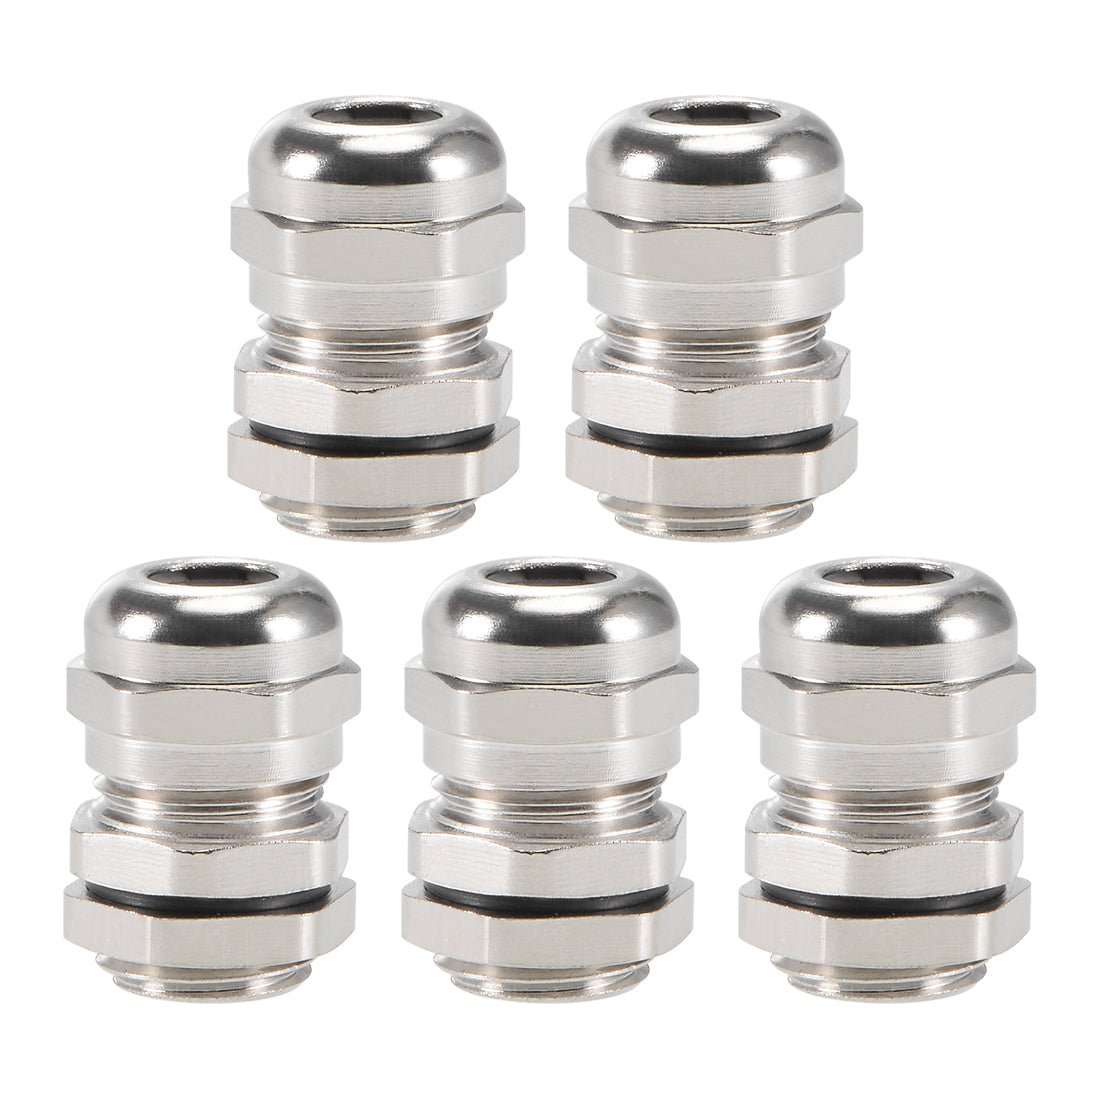 uxcell Uxcell M12x1.5 Cable Gland 3mm-6.5mm Wire Hole Waterproof Metal Joint Adjustable Locknut with Washer 5pcs